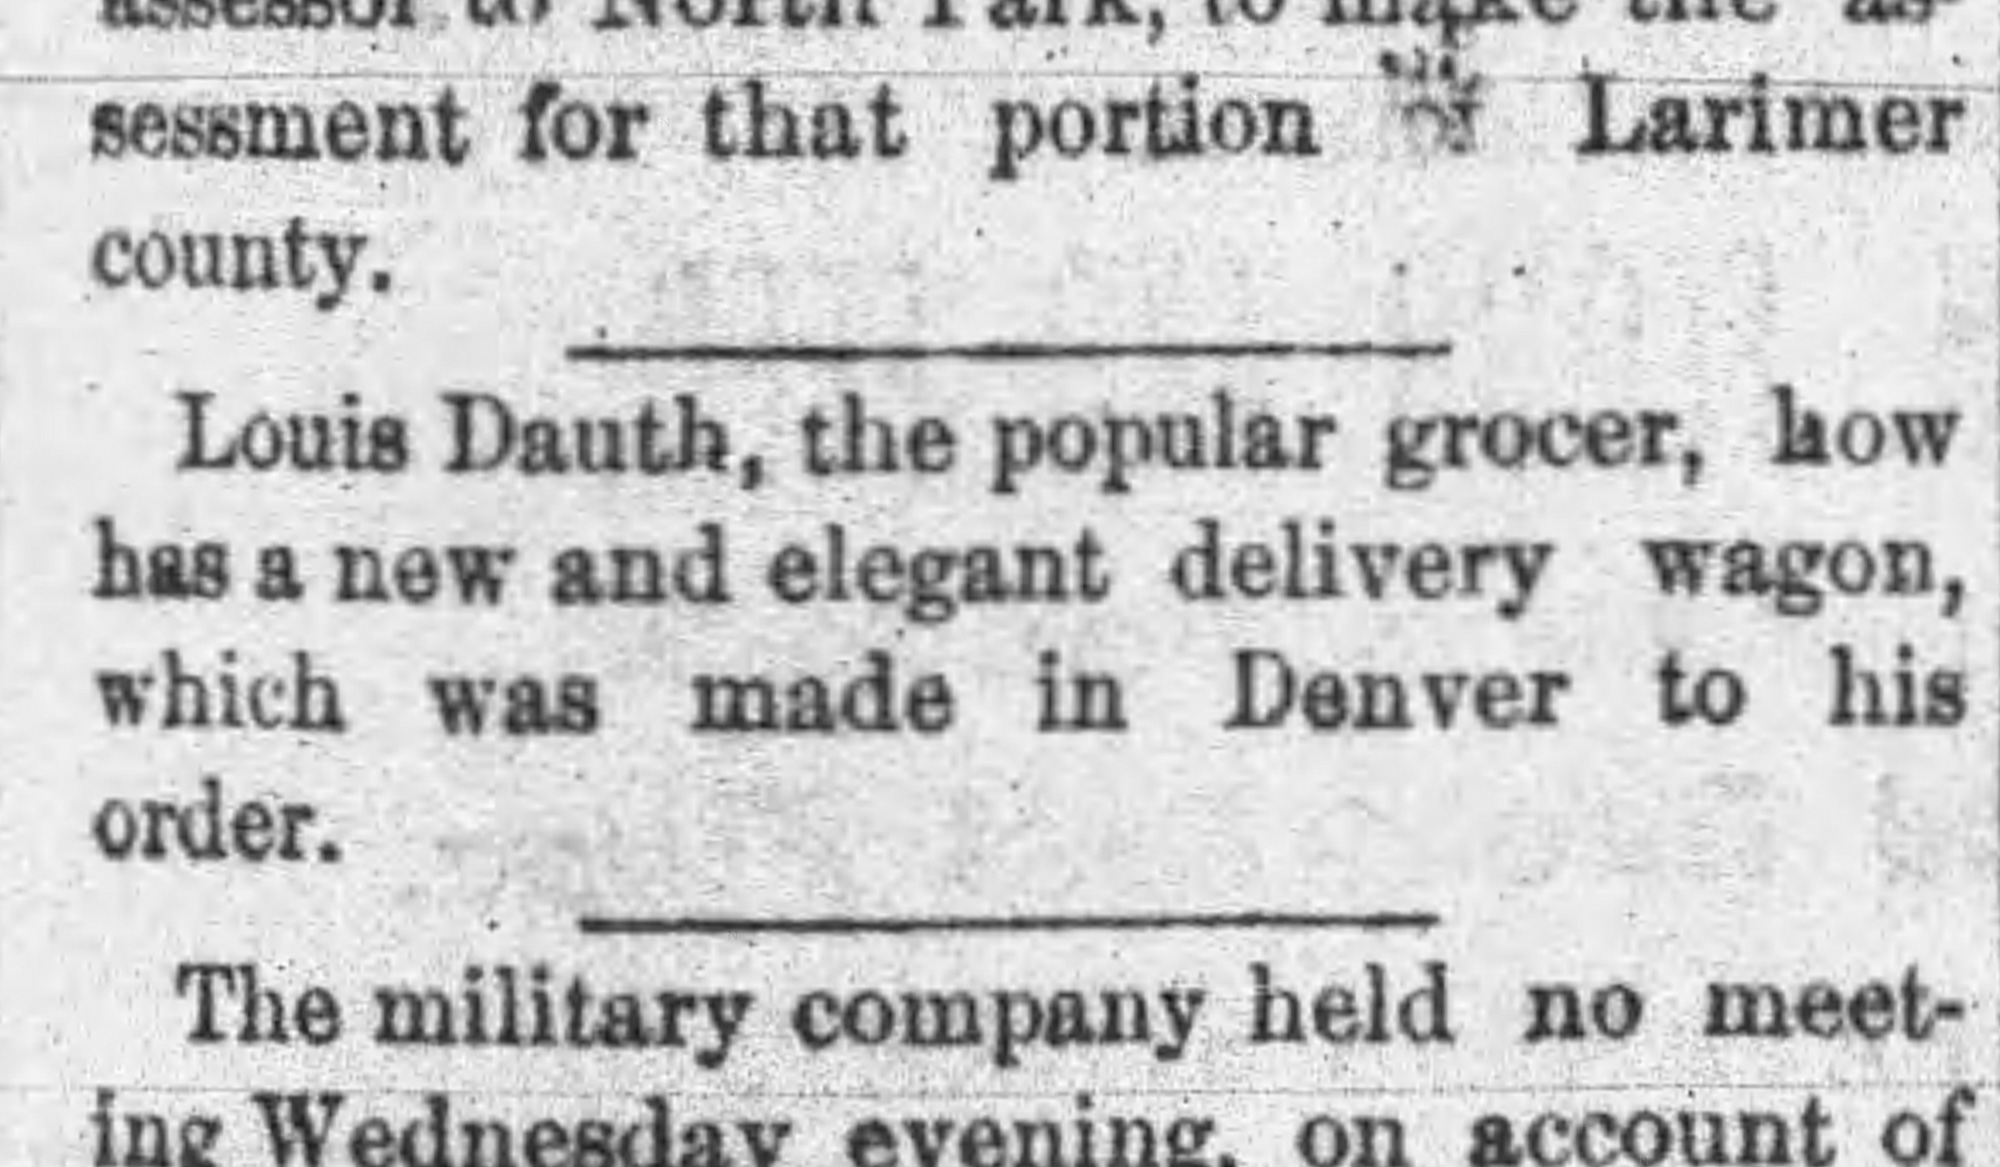 Dauth Family Archive - 1885-06-20 - The Fort Collins Express - Louis Dauth Buys Delivery Wagon